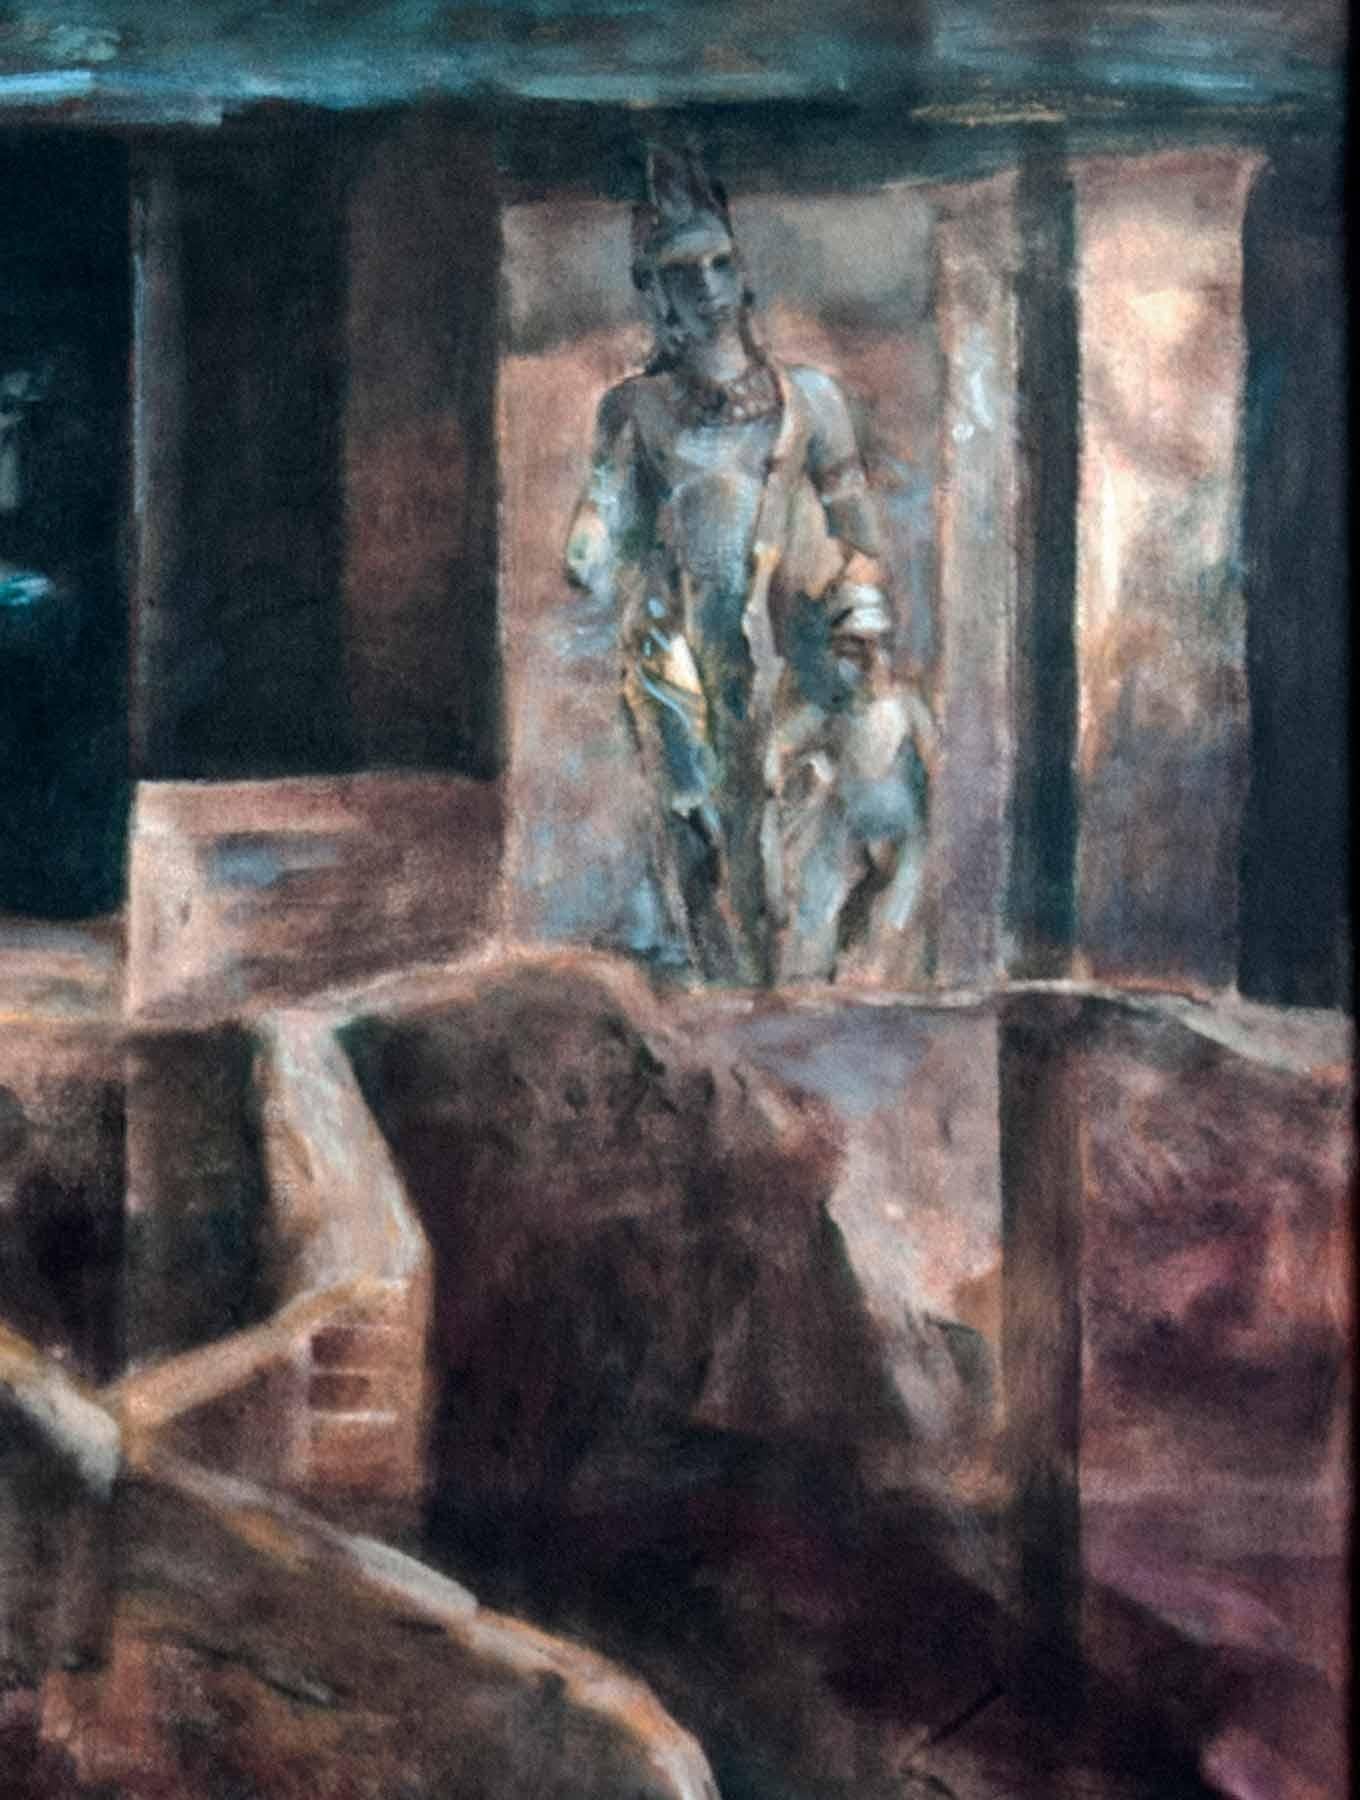 Deity, Mythscape Series, Structures, Indian Art, Oil on canvas, Brown 